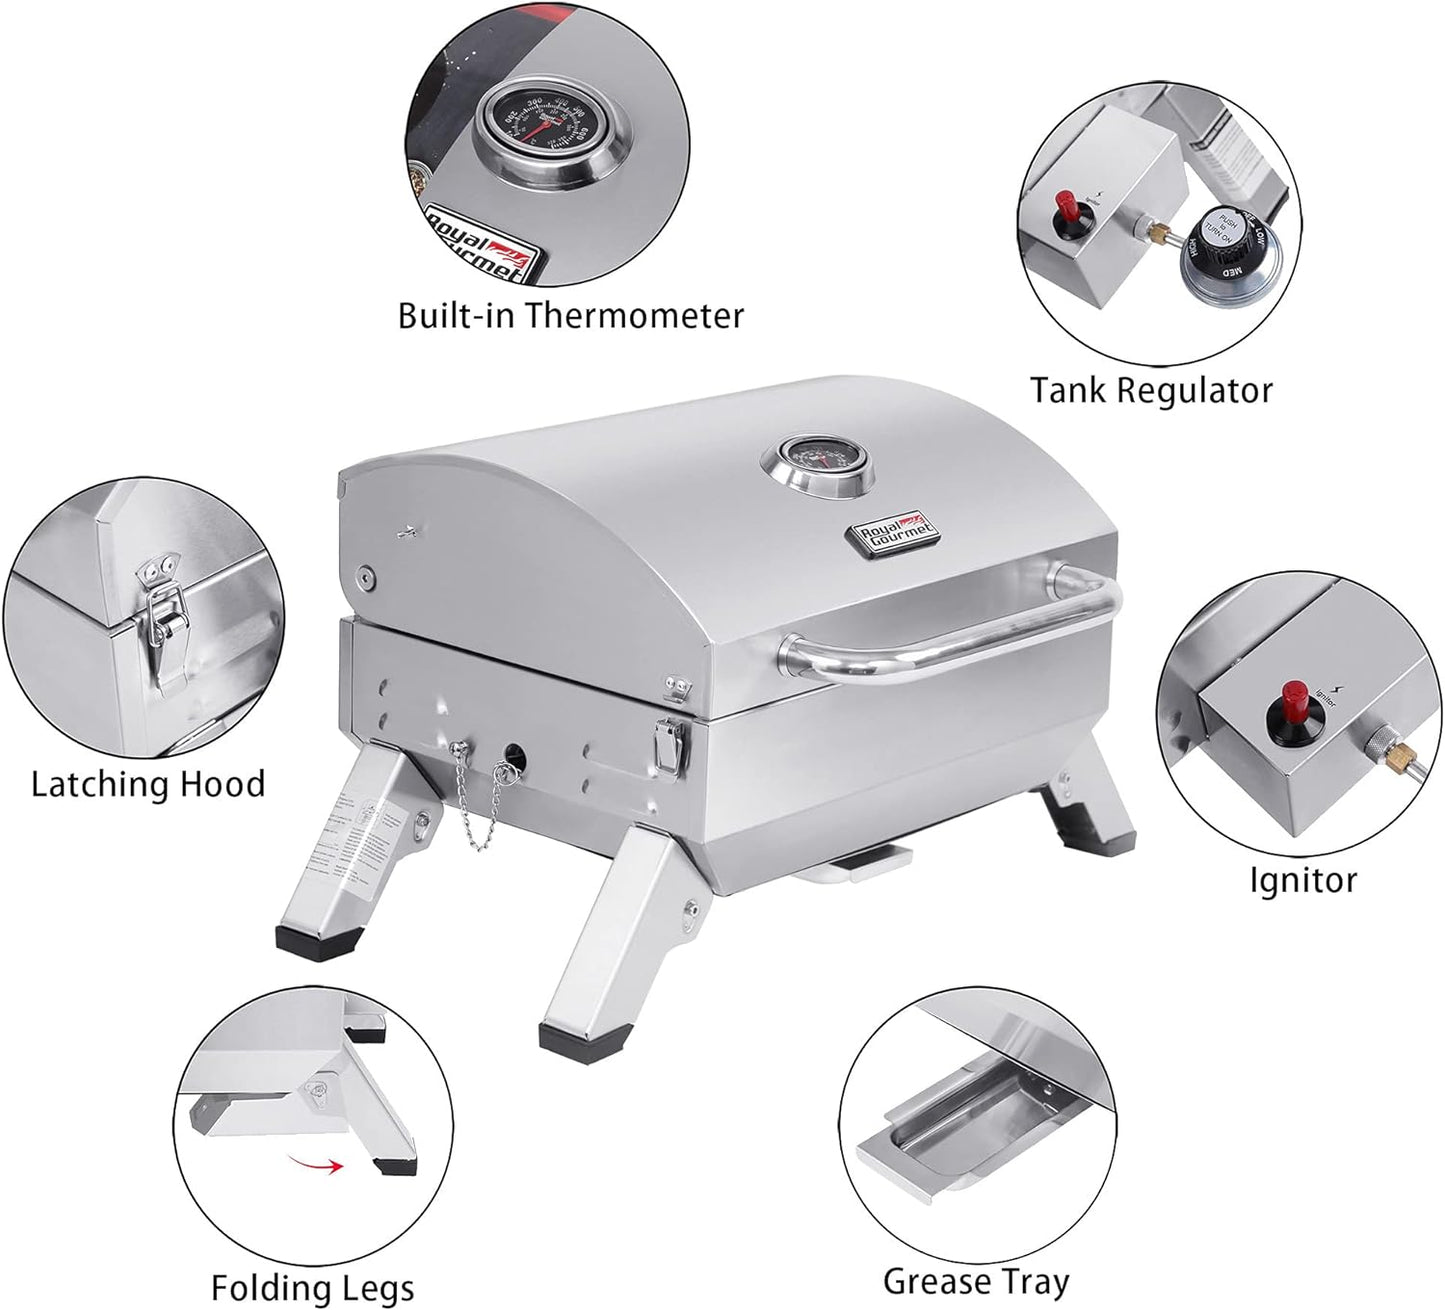 Royal Gourmet GT1001 Stainless Steel Portable Grill, 10000 BTU BBQ Tabletop Gas Grill with Folding Legs and Lockable Lid, Outdoor Camping, Deck and Tailgating, Silver